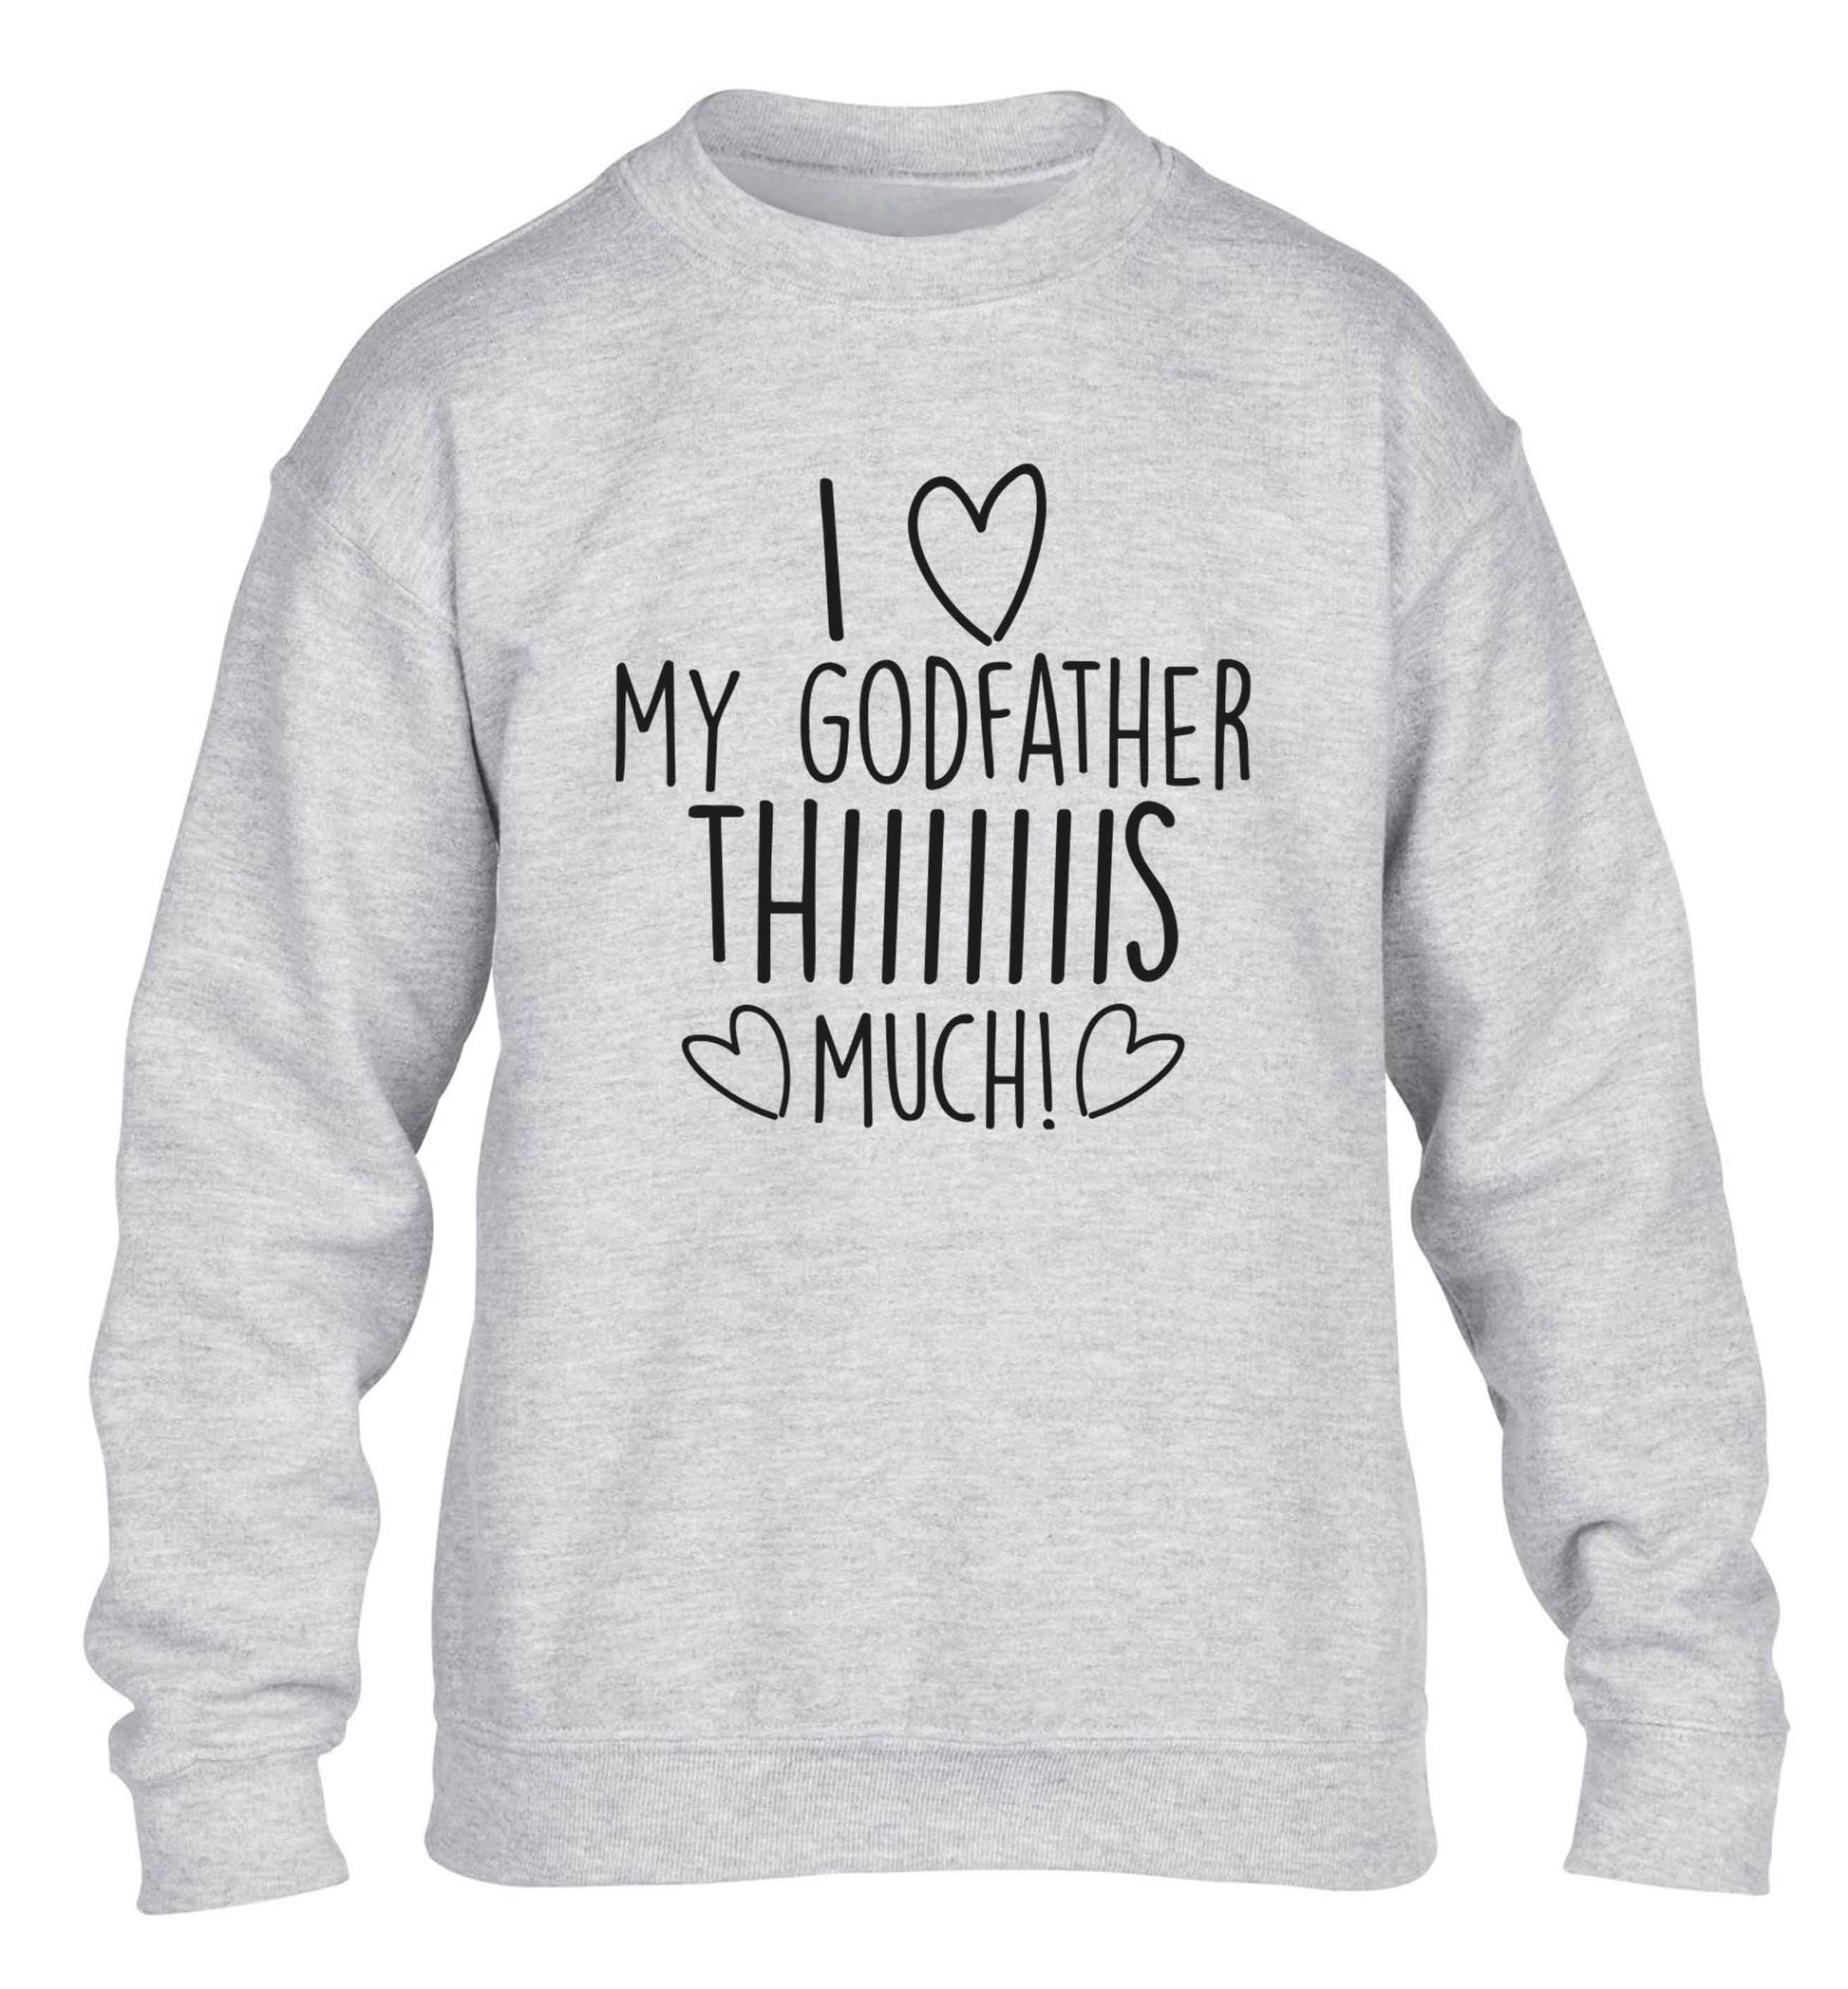 I love my Godfather this much children's grey sweater 12-13 Years